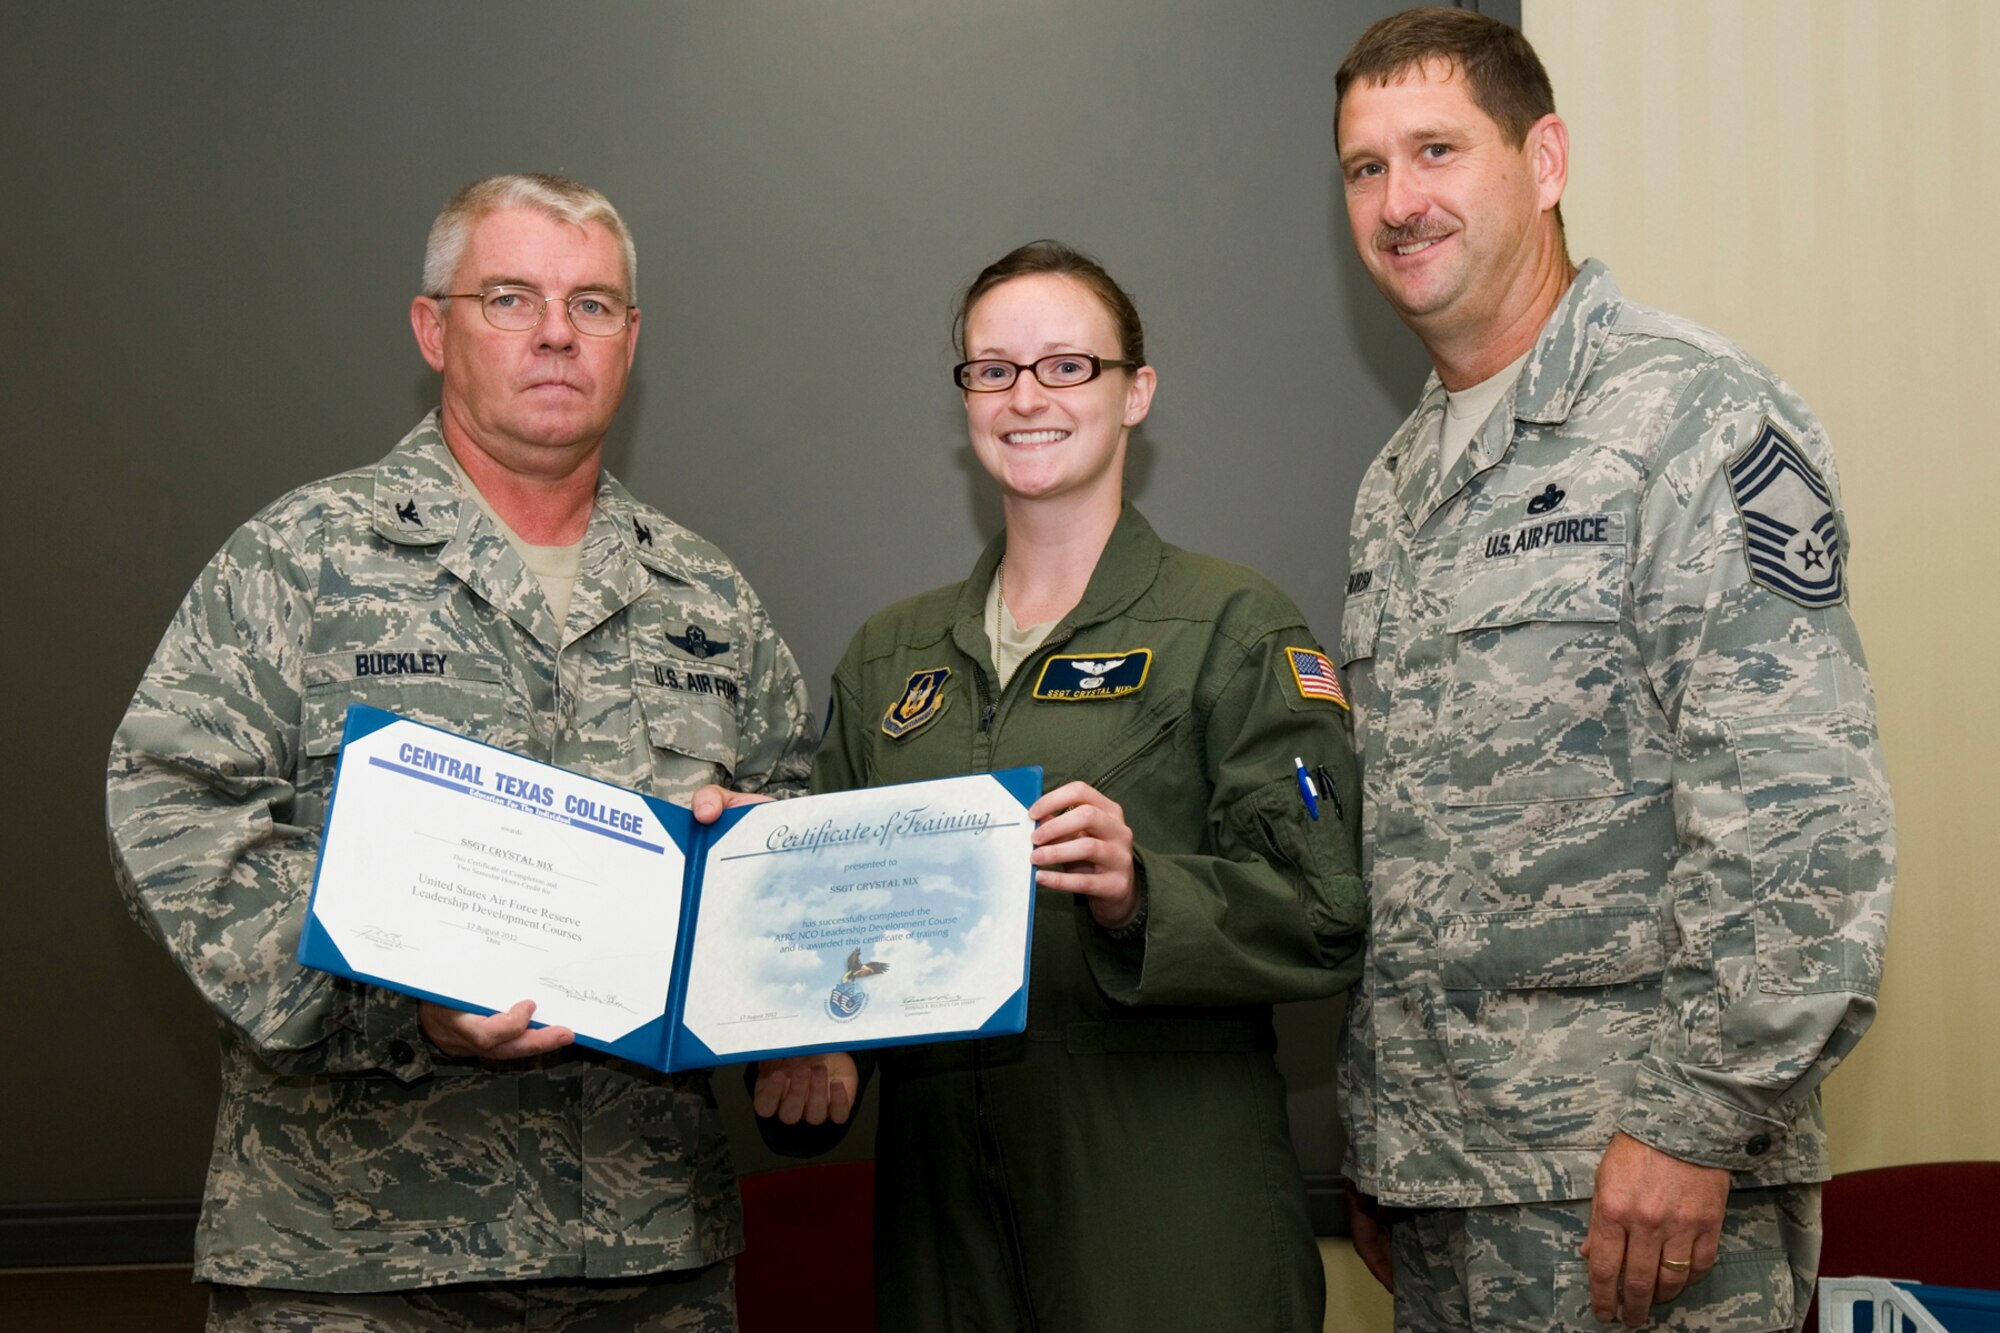 GRISSOM AIR RESERVE BASE, Ind. -- Staff Sgt. Crystal Nix, 72nd Air Refueling Squadron in-flight refueling technician, receives a certificate of training from Col. Don Buckley, 434th Air Refueling Wing commander, and Chief Master Sergeant James Burba, 434th Maintenance Operations Flight maintenance superintendent, at a graduation ceremony for a Non-Commissioned Officer Leadership Development Course here Aug. 17. Nix graduated the course with 20 other NCOs. (U.S. Air Force photo/Senior Airman Andrew McLaughlin)